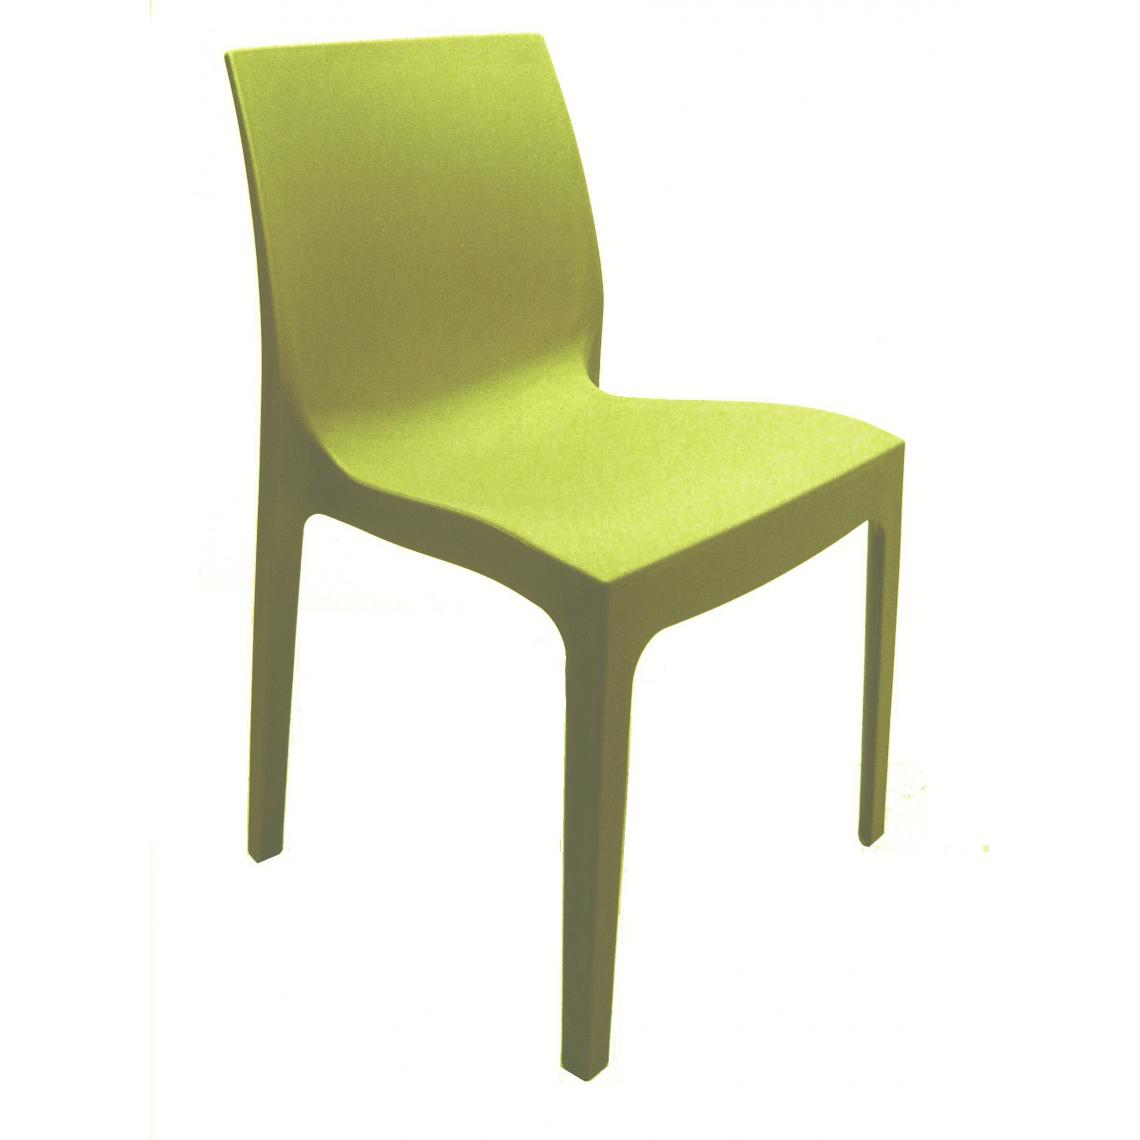 3S. x Home - Chaise Design Verte Anis ISTANBUL - Chaises